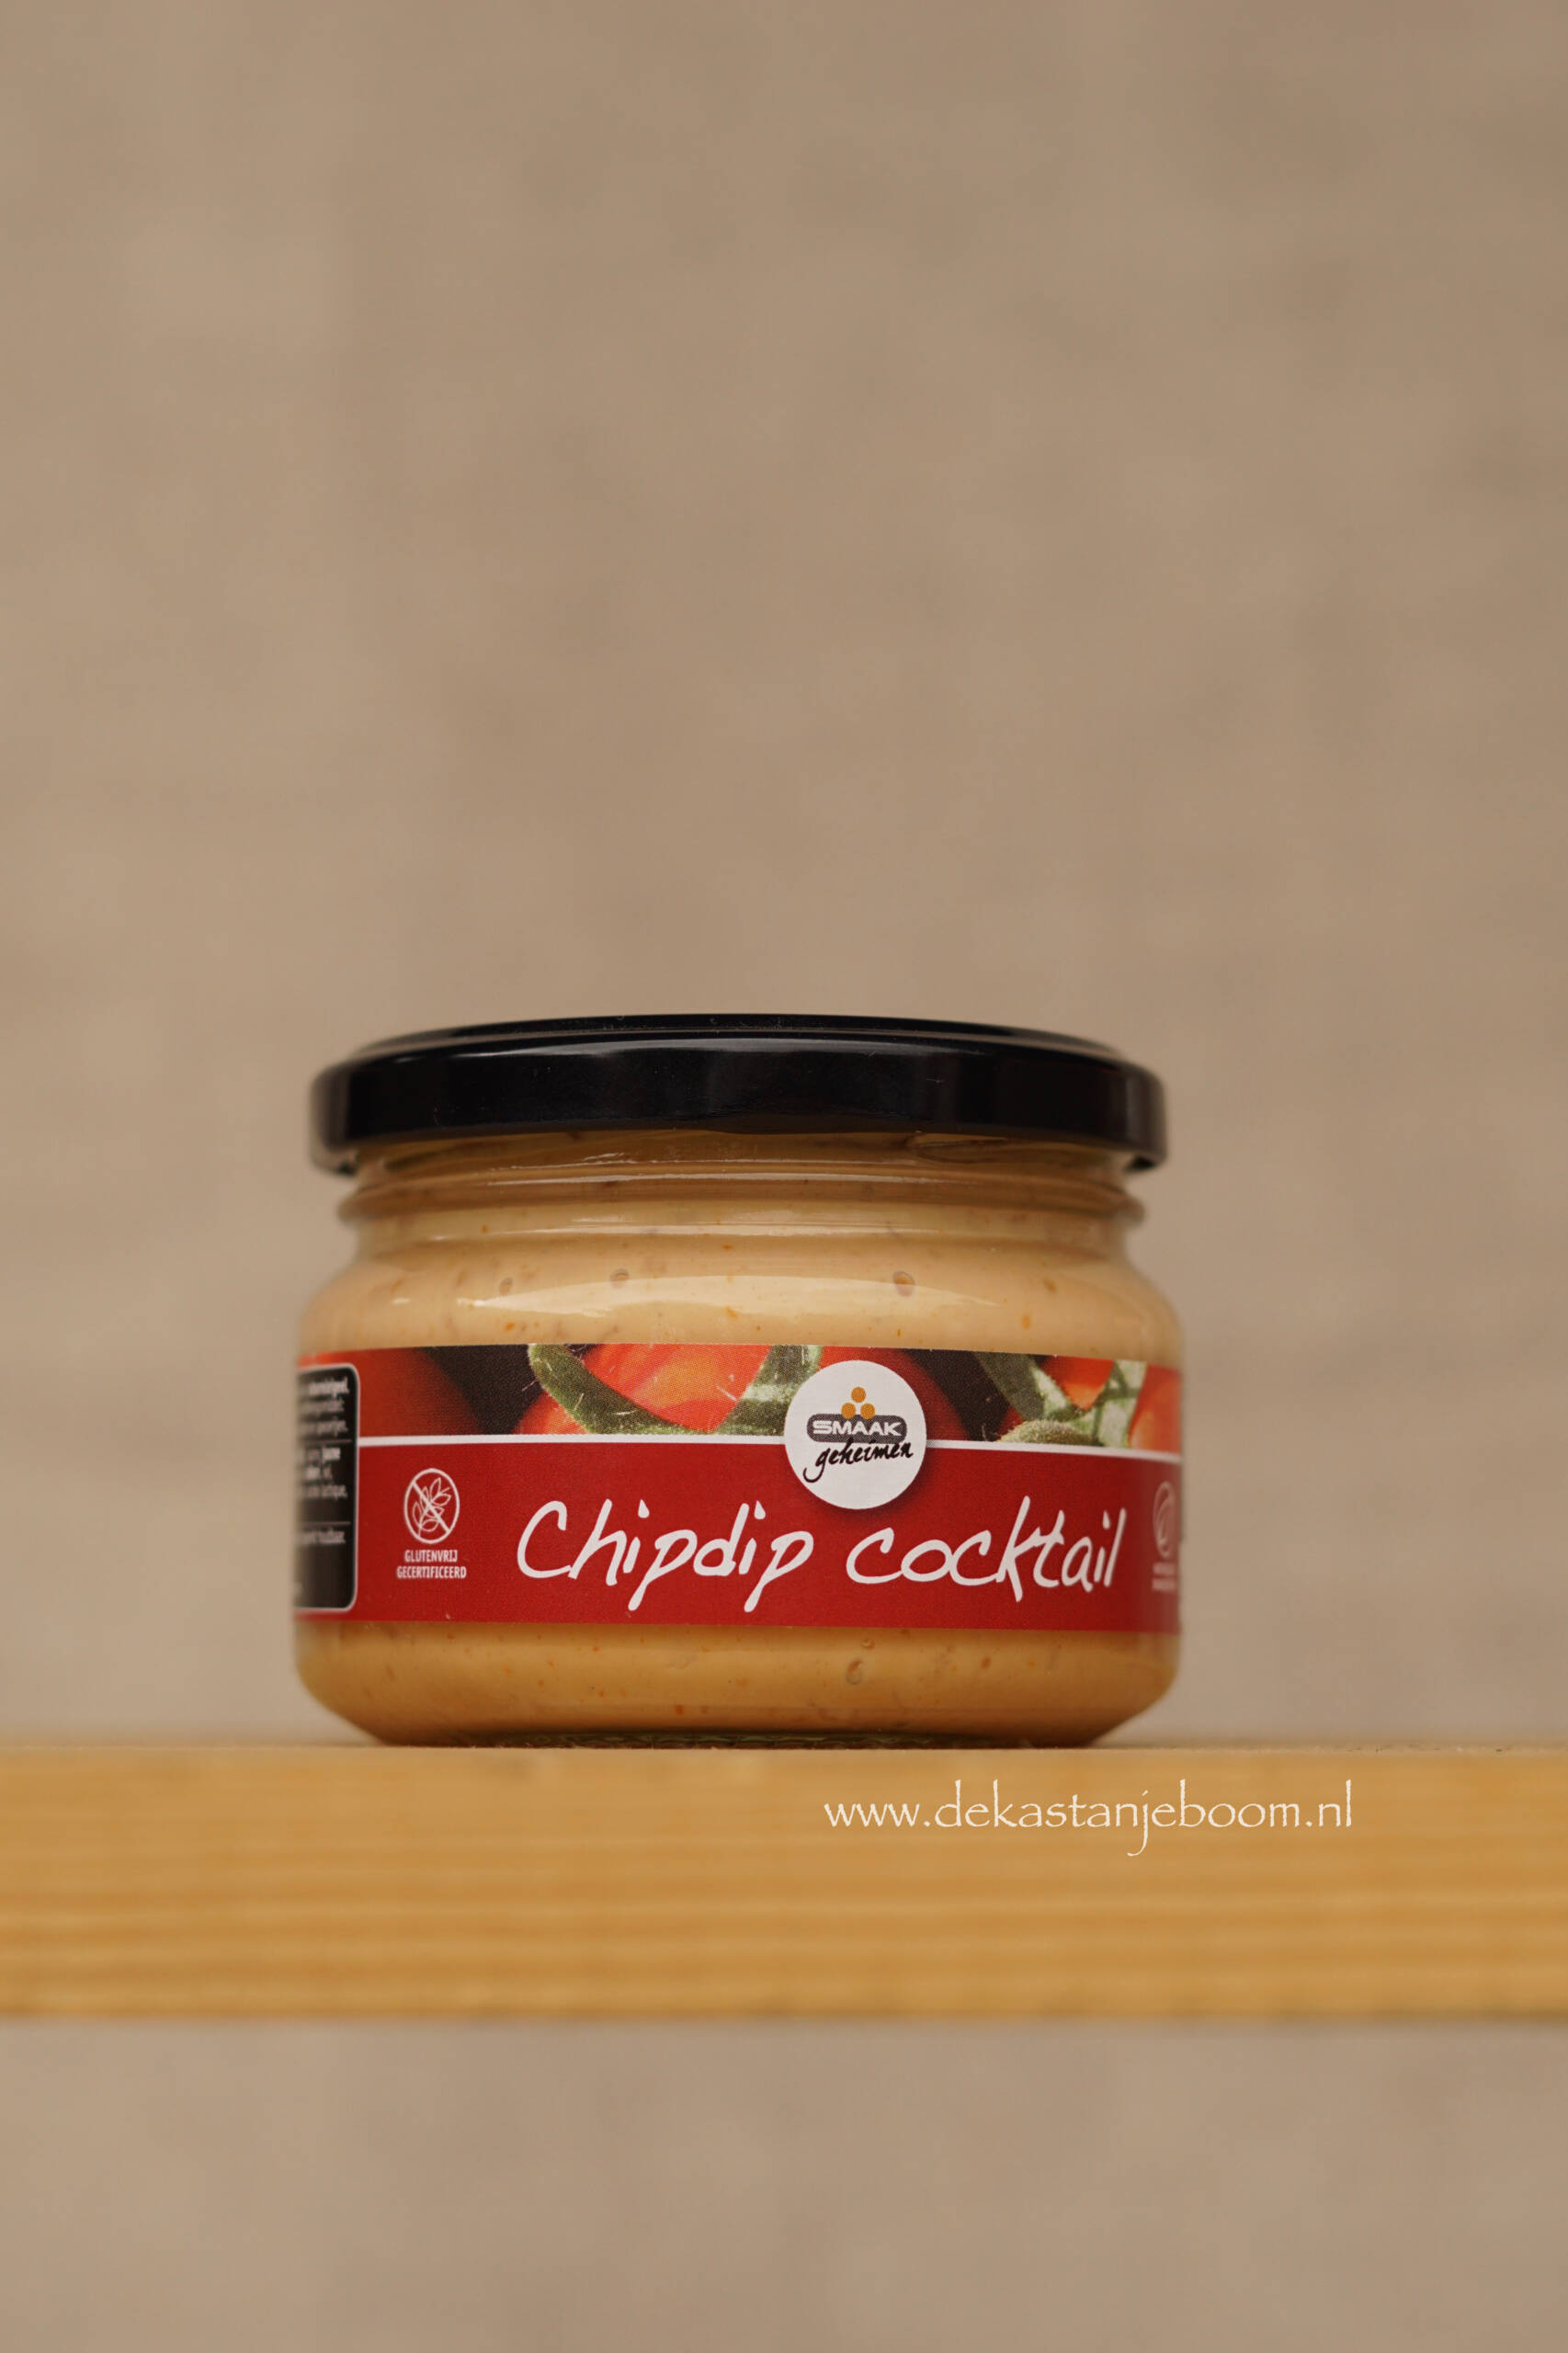 Chipdip coctail